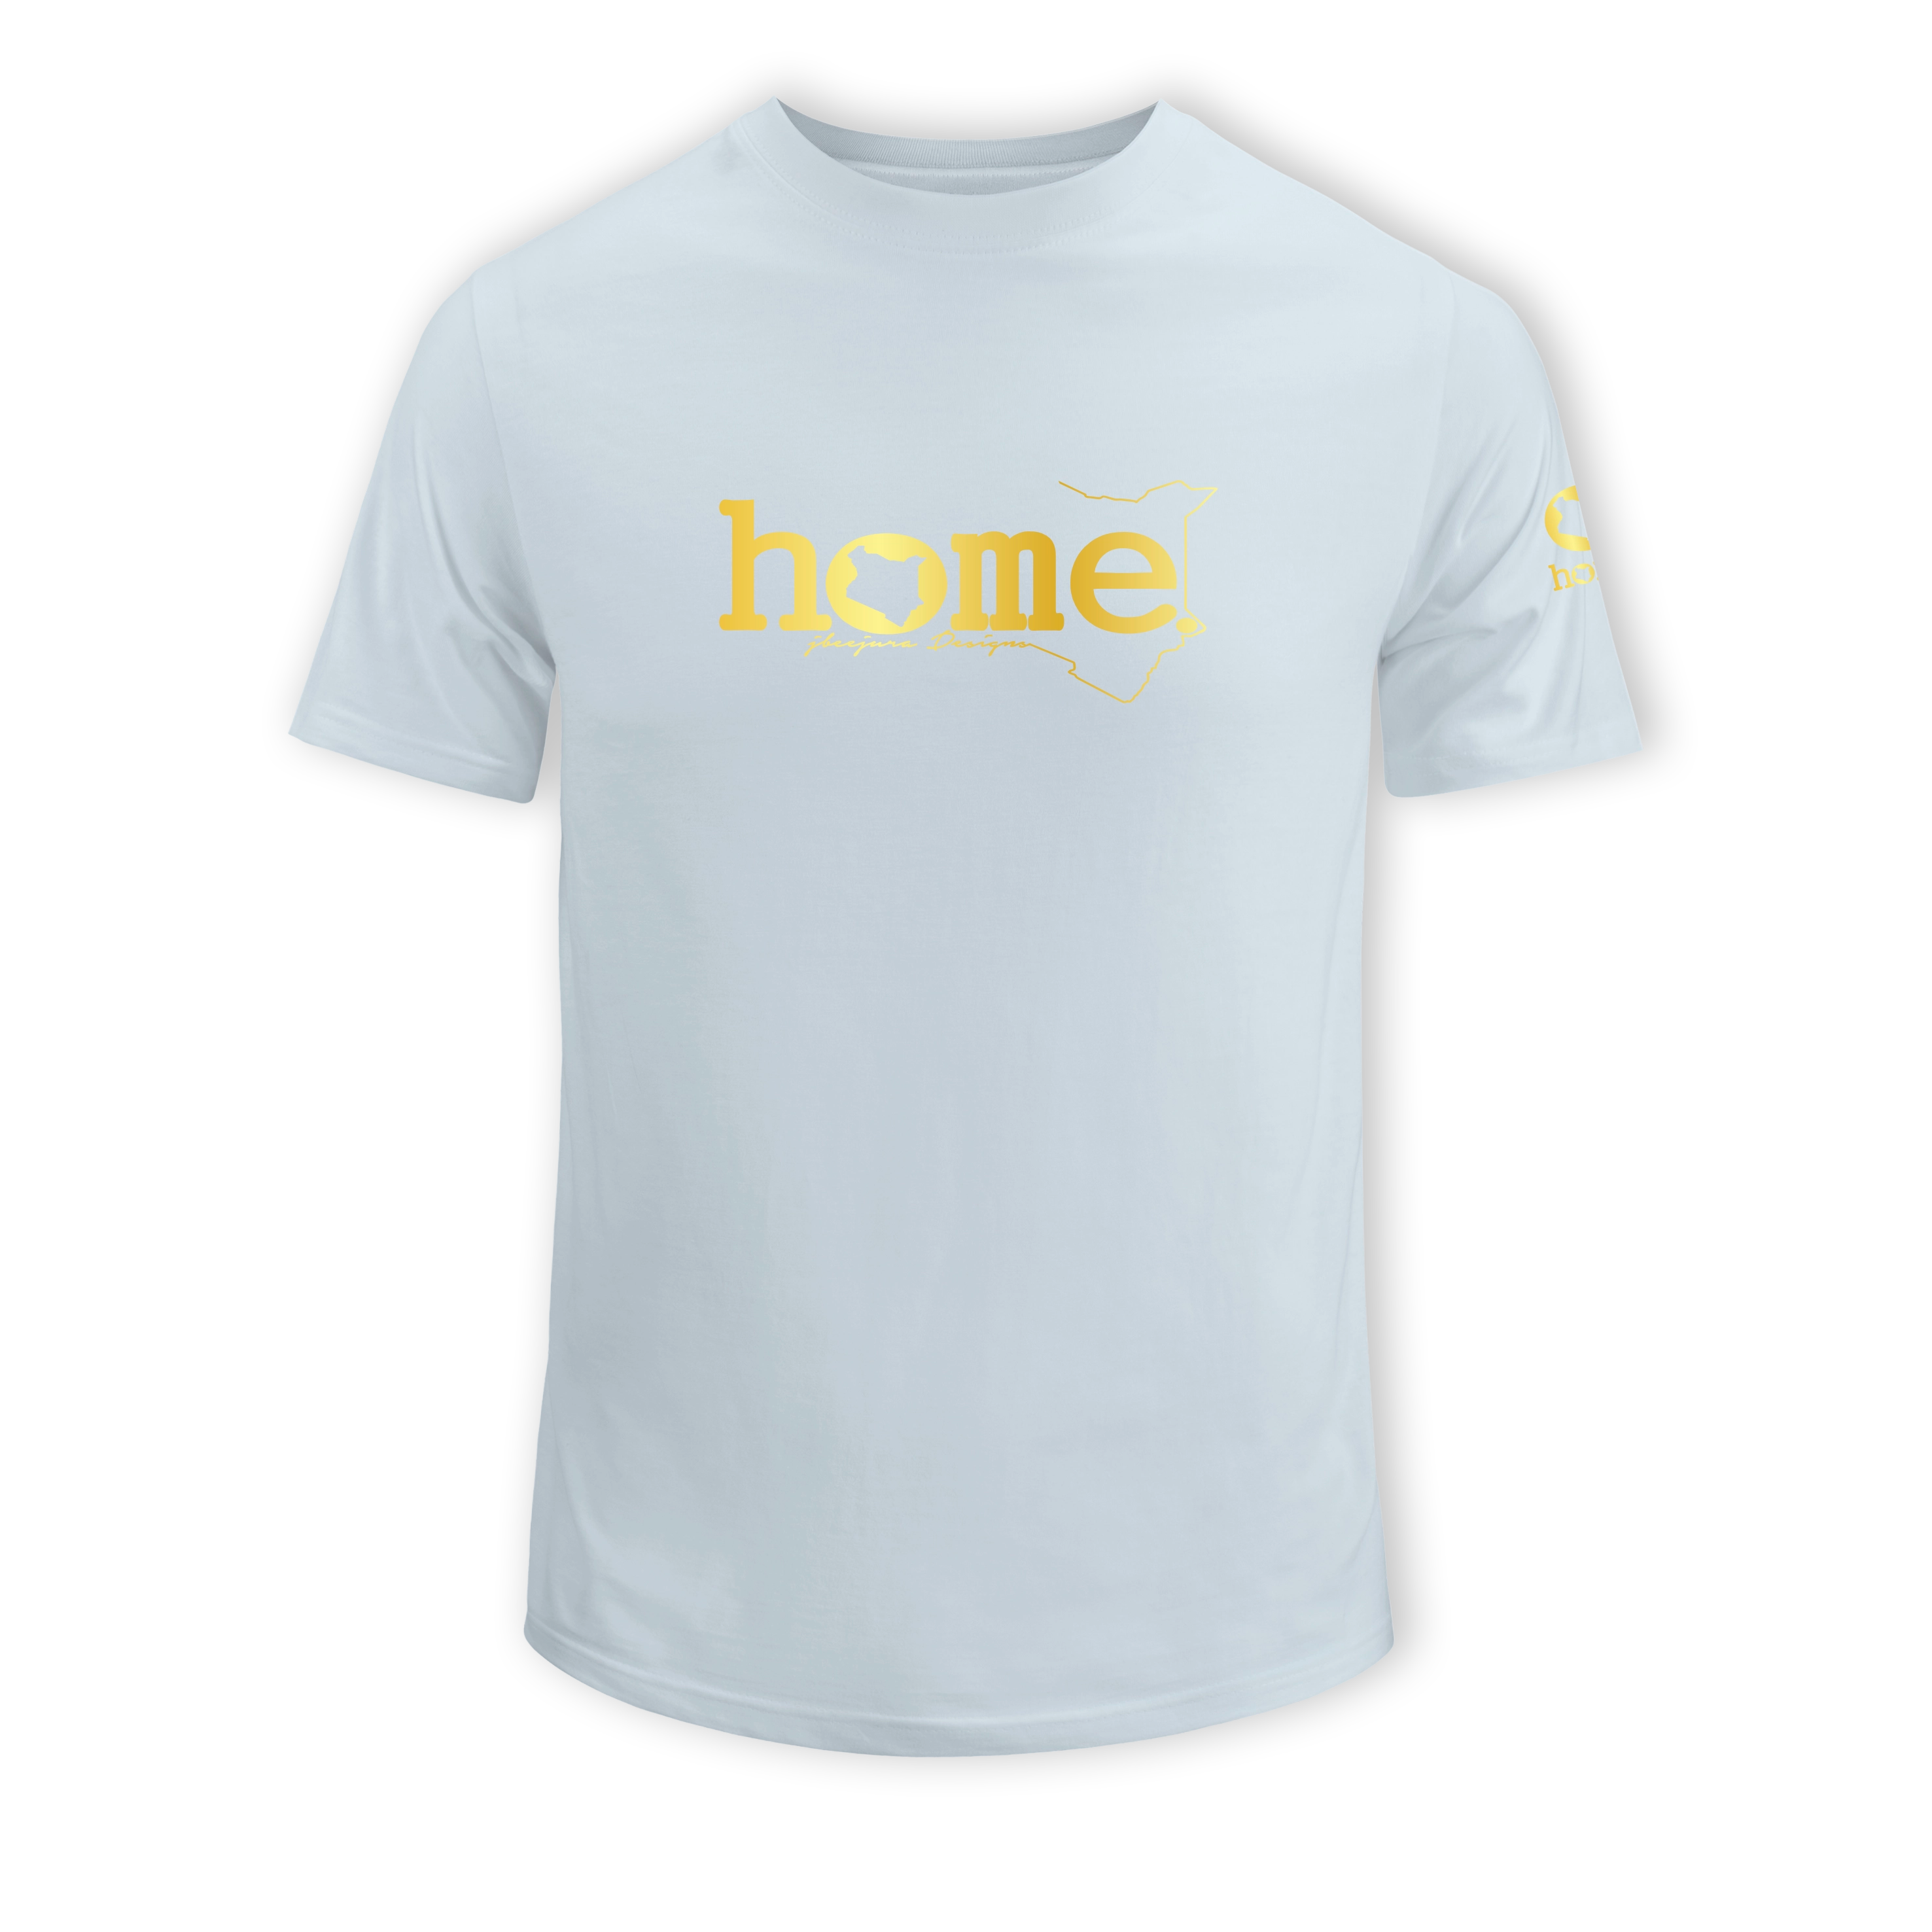 home_254 KIDS SHORT-SLEEVED SKY BLUE T-SHIRT WITH A GOLD CLASSIC WORDS PRINT – COTTON PLUS FABRIC